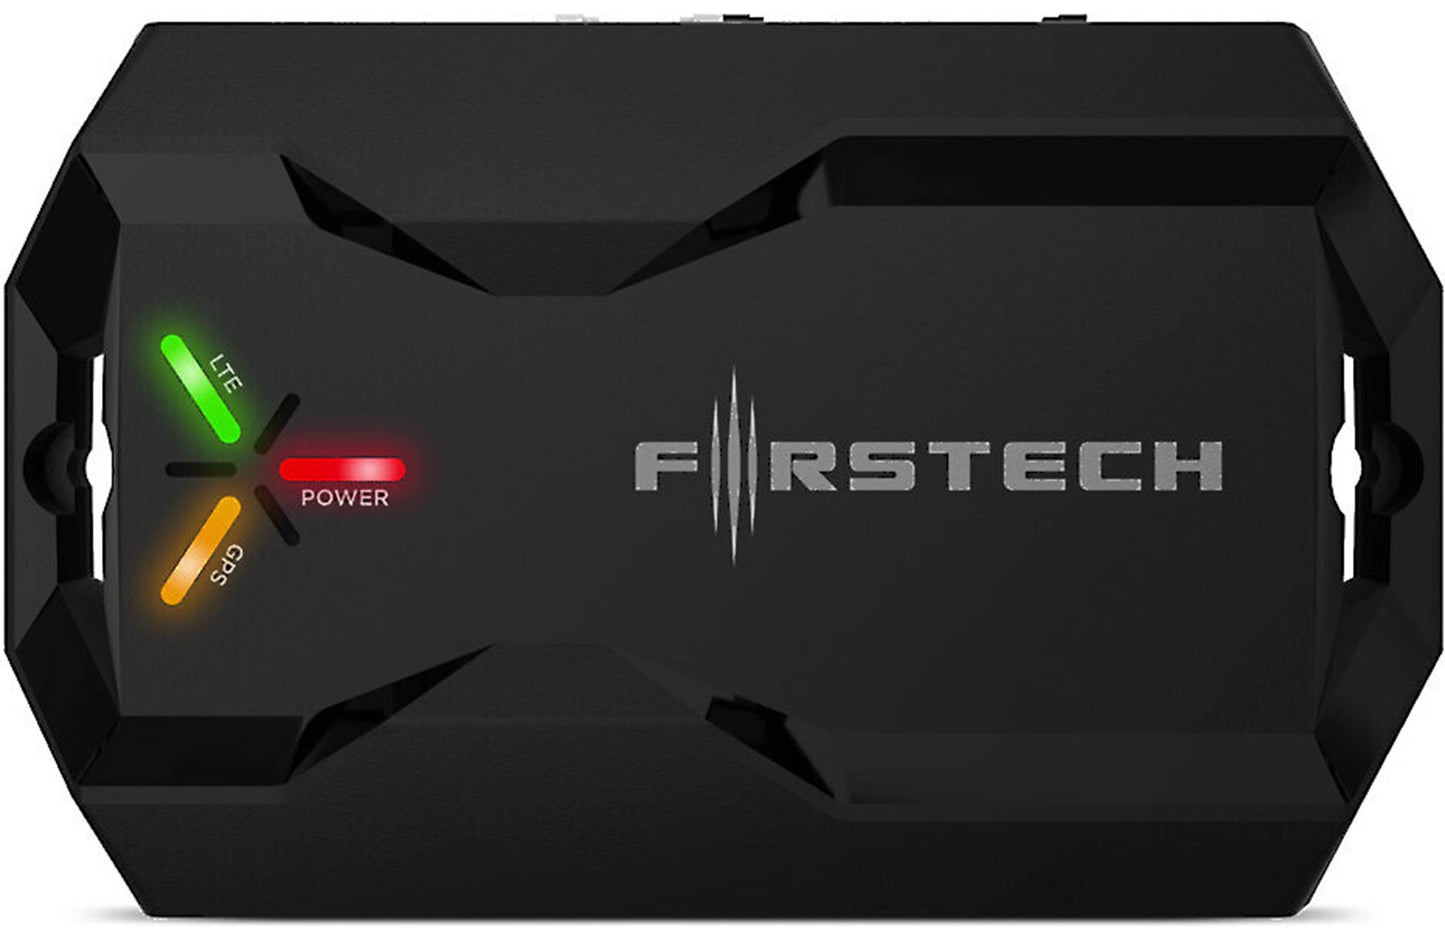 Firstech Drone X1-MAX-LTE